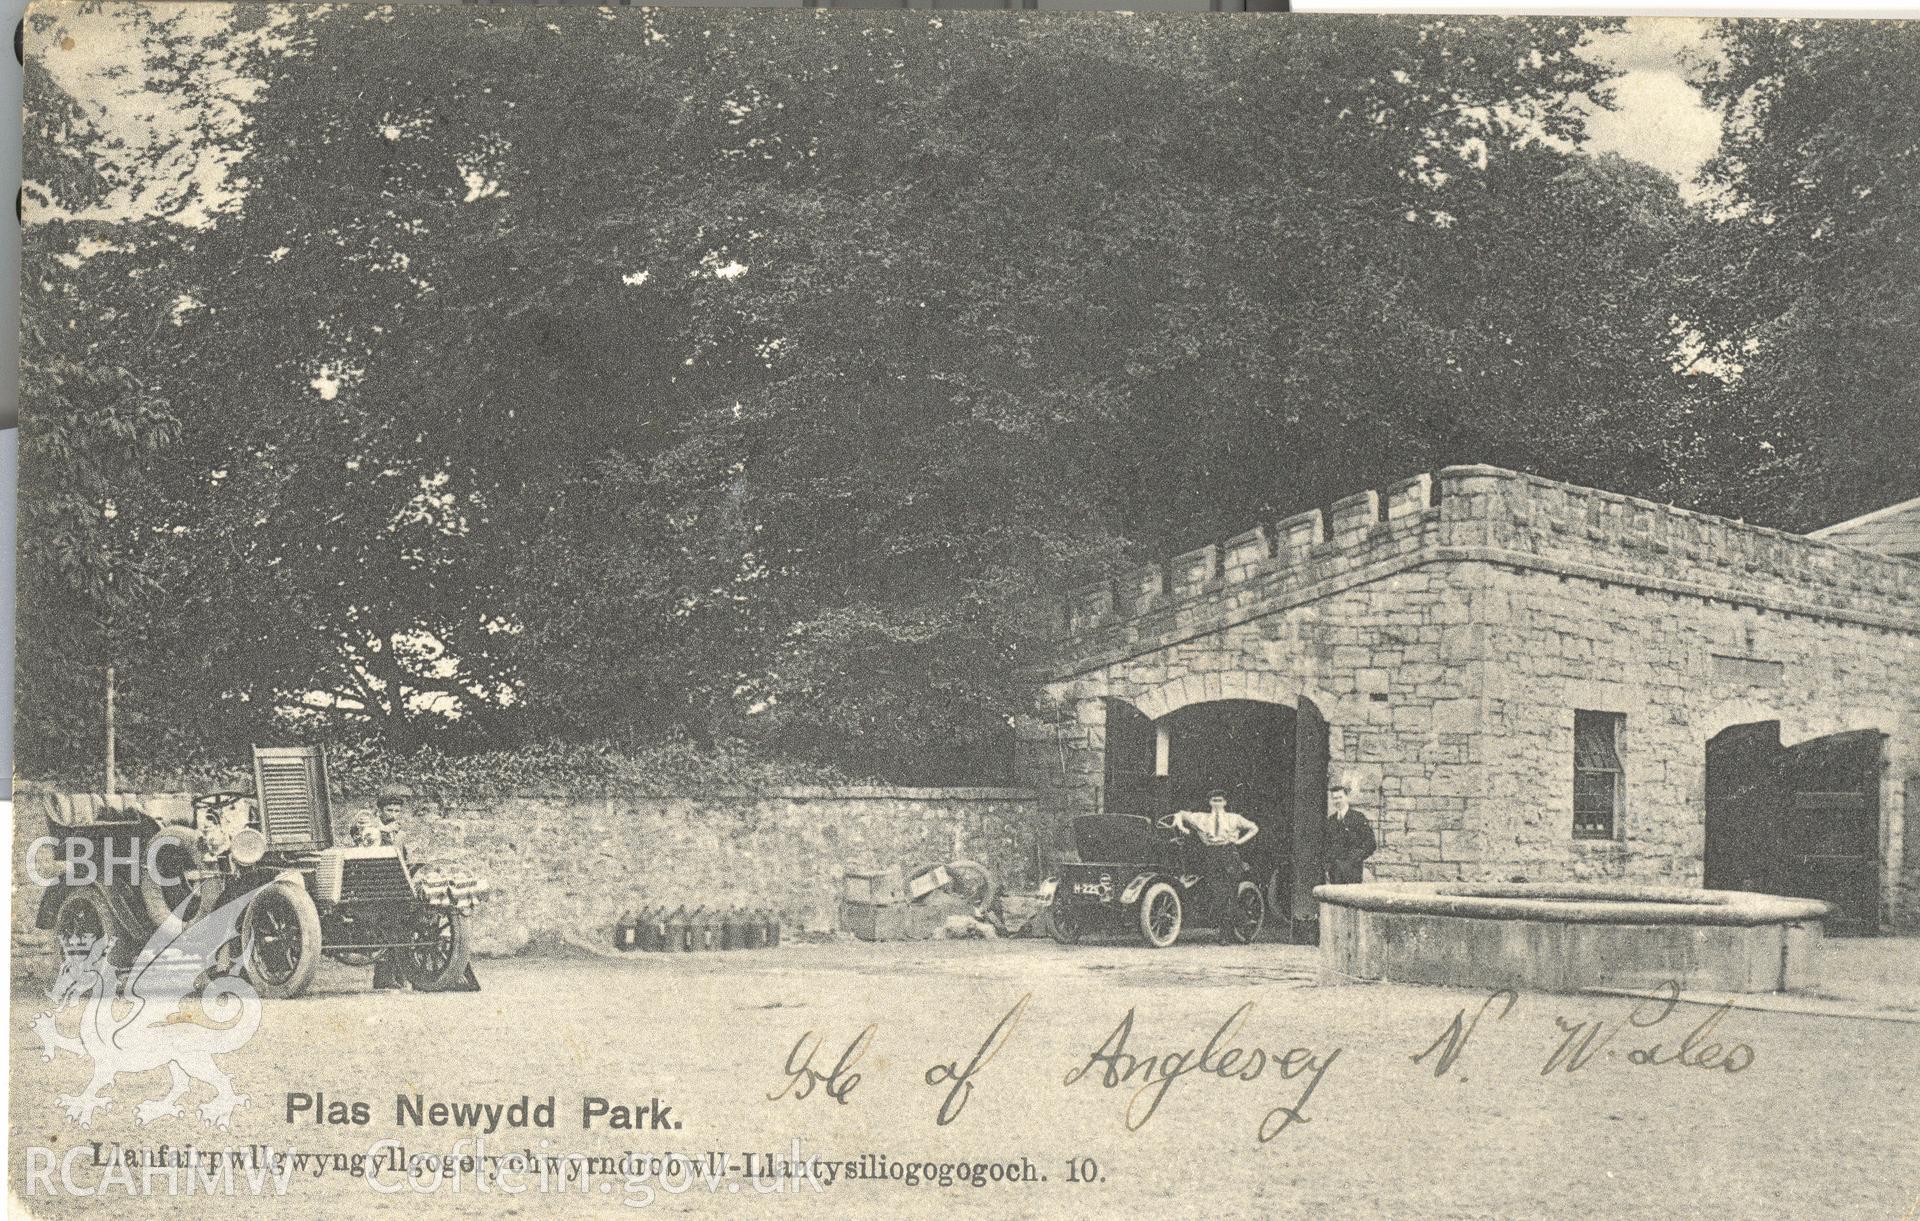 Digitised postcard image of Plas Newydd grounds, Llanddaniel Fab, including garages, E.E. Roberts' Series  LlanfairPG. Produced by Parks and Gardens Data Services, from an original item in the Peter Davis Collection at Parks and Gardens UK. We hold only web-resolution images of this collection, suitable for viewing on screen and for research purposes only. We do not hold the original images, or publication quality scans.